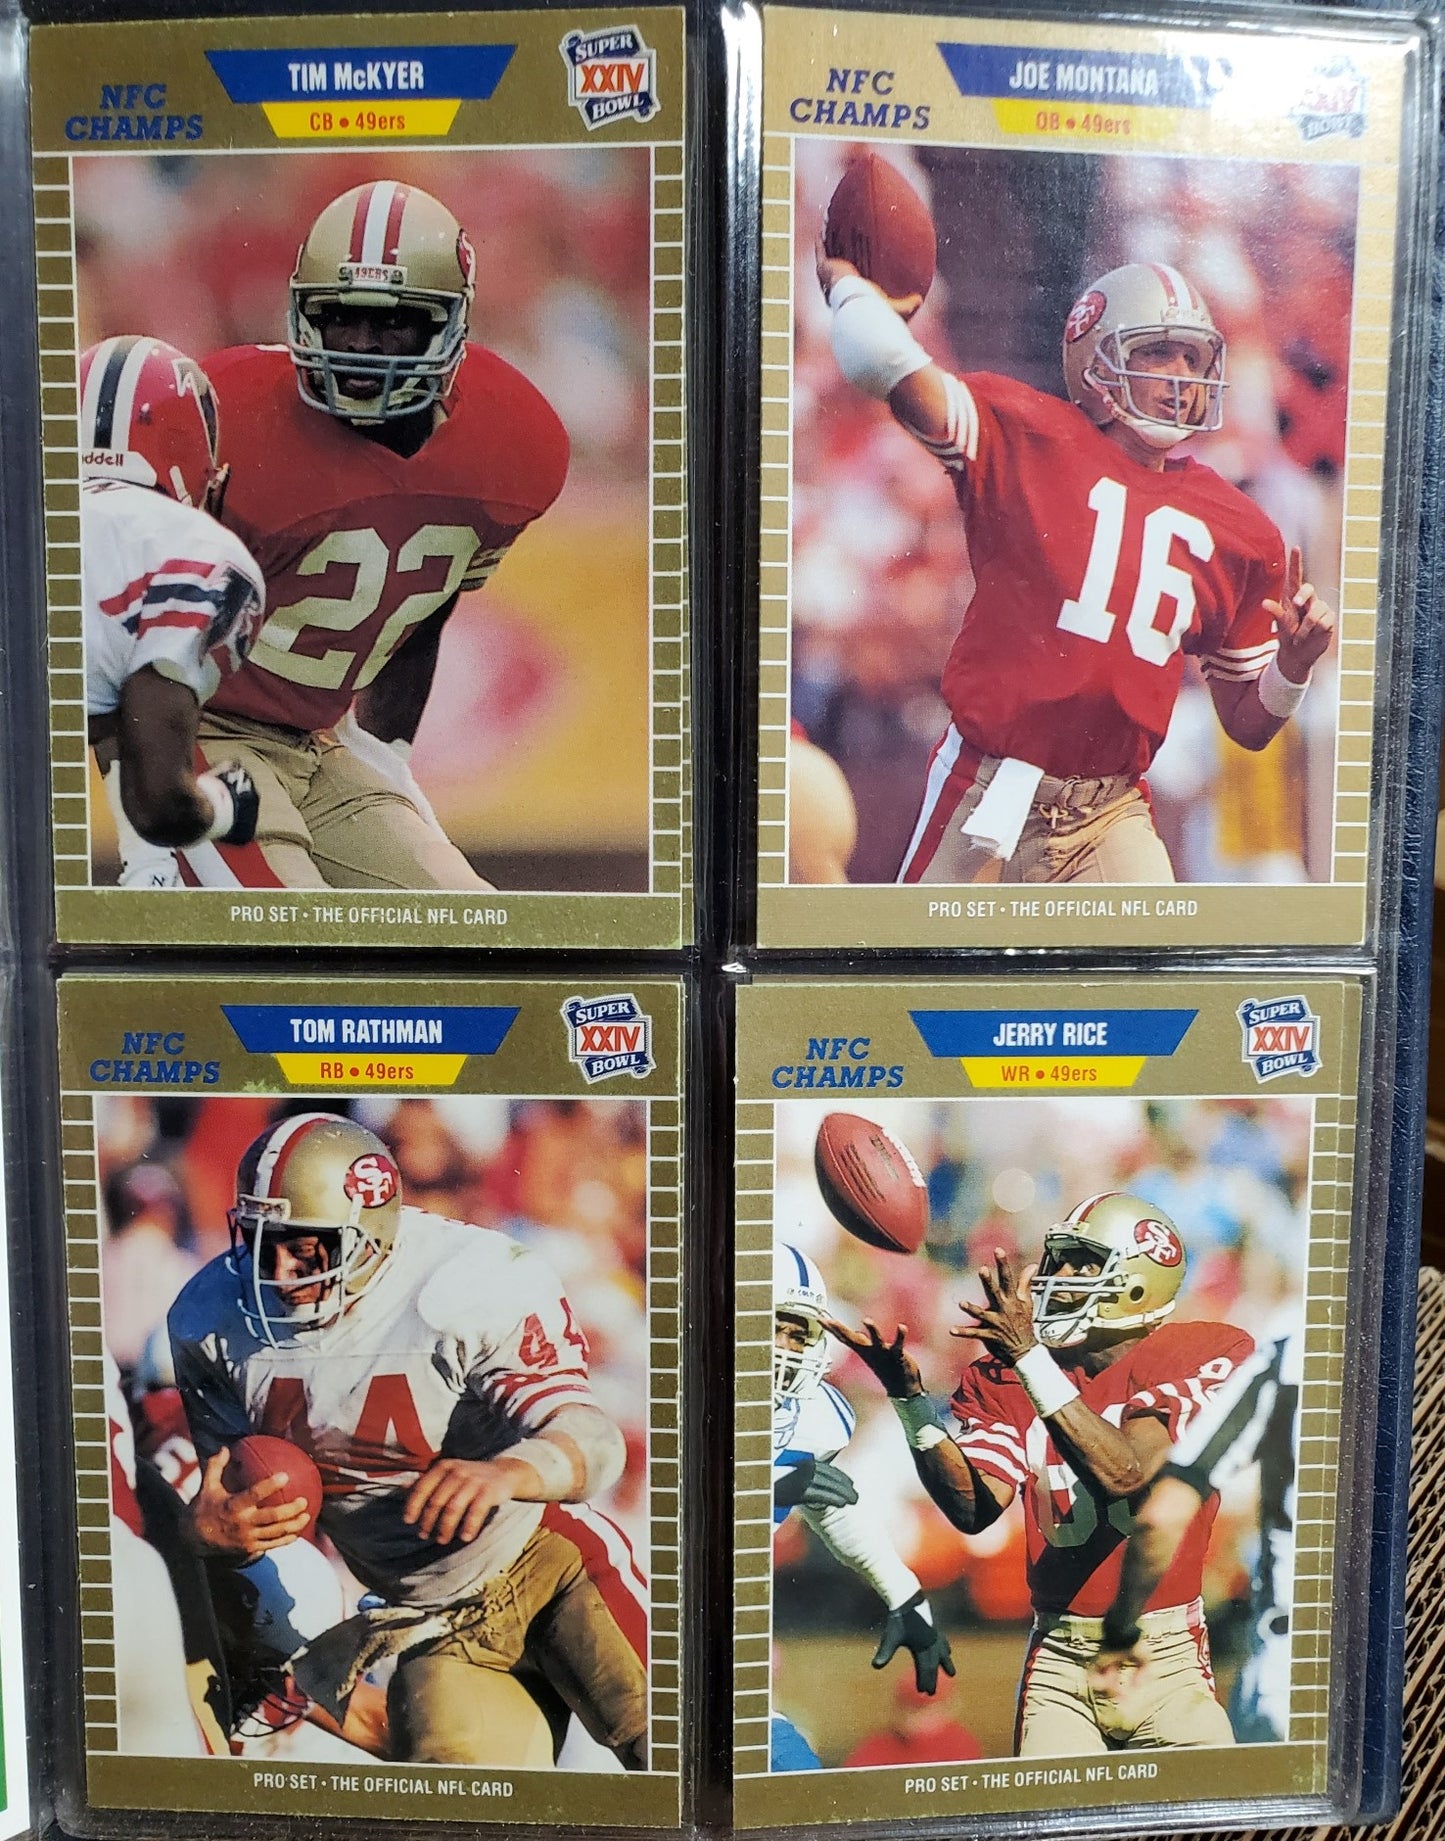 Super Bowl XXIV GTE Special Collectors Edition Trading Card Binder Set